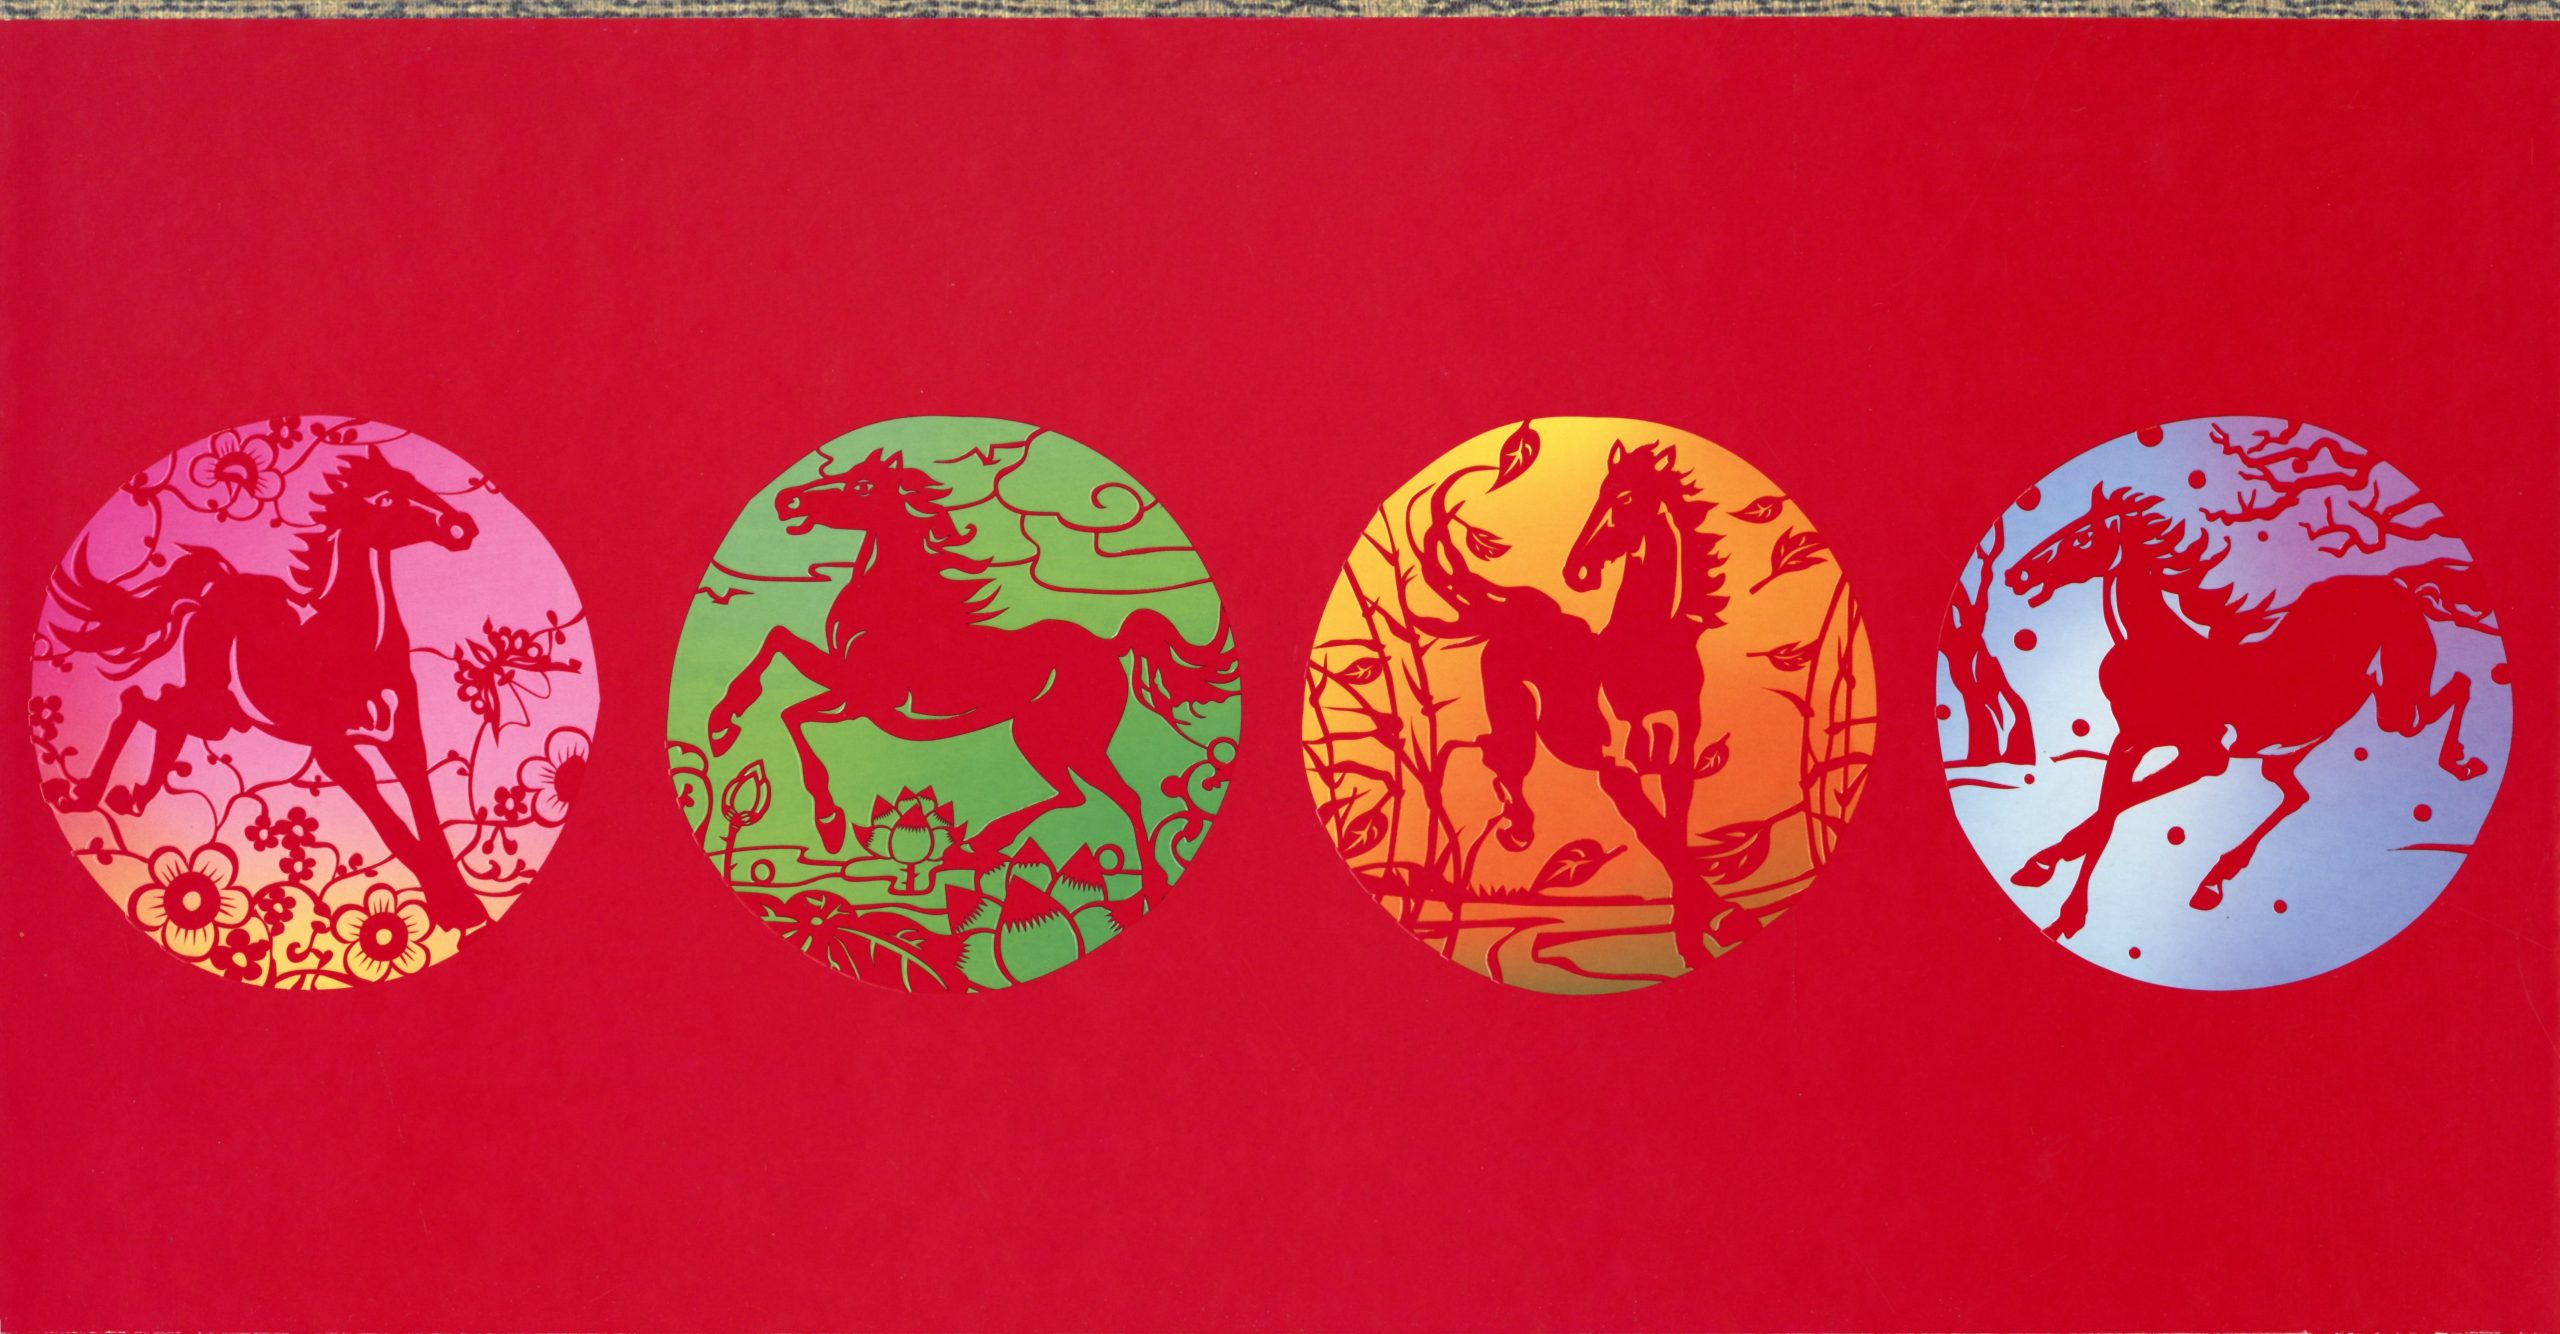 Illustration of four horses, one each within a colorful circle. Shown against a solid red surface.